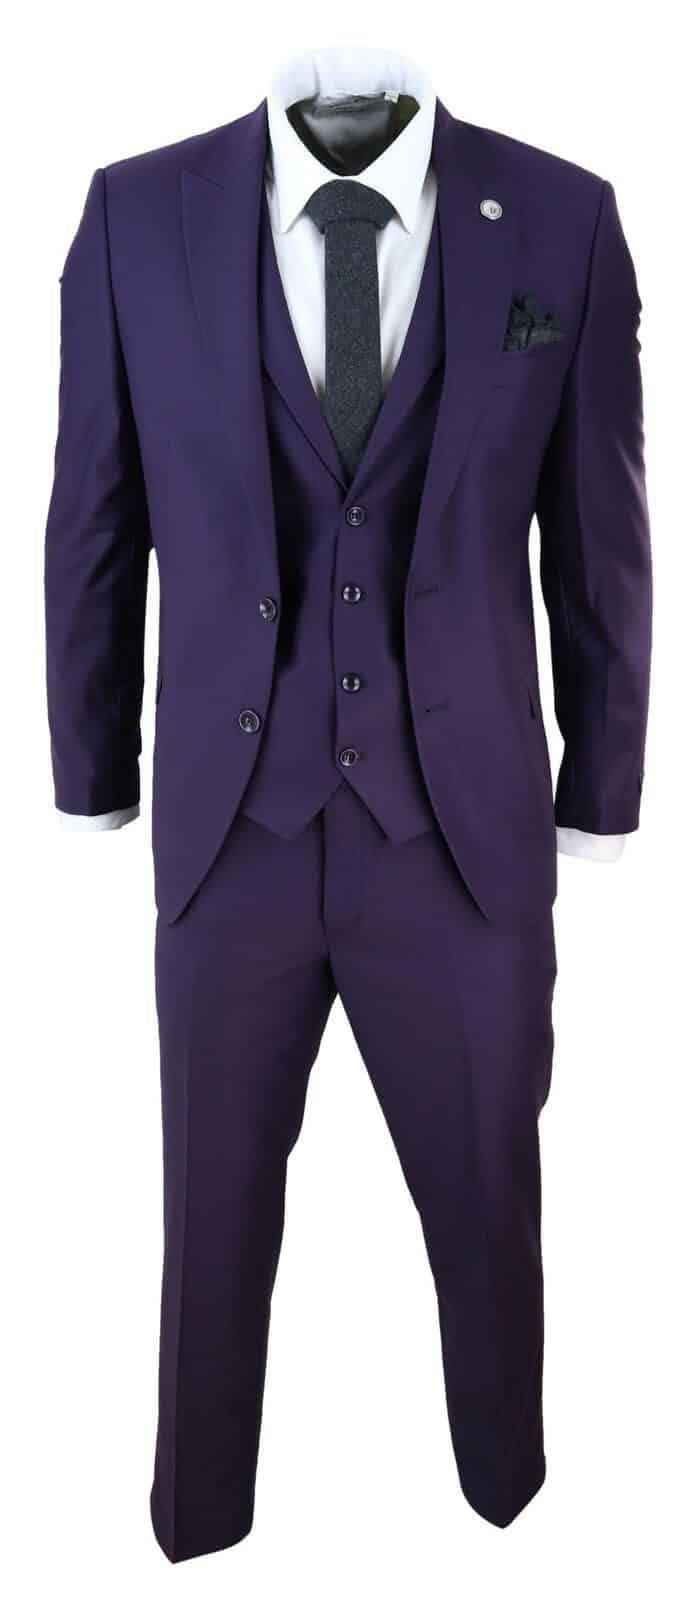 New Mens 3 Piece Suit Plain Purple Classic Tailored Fit Smart Casual 1920s Formal - Upperclass Fashions 